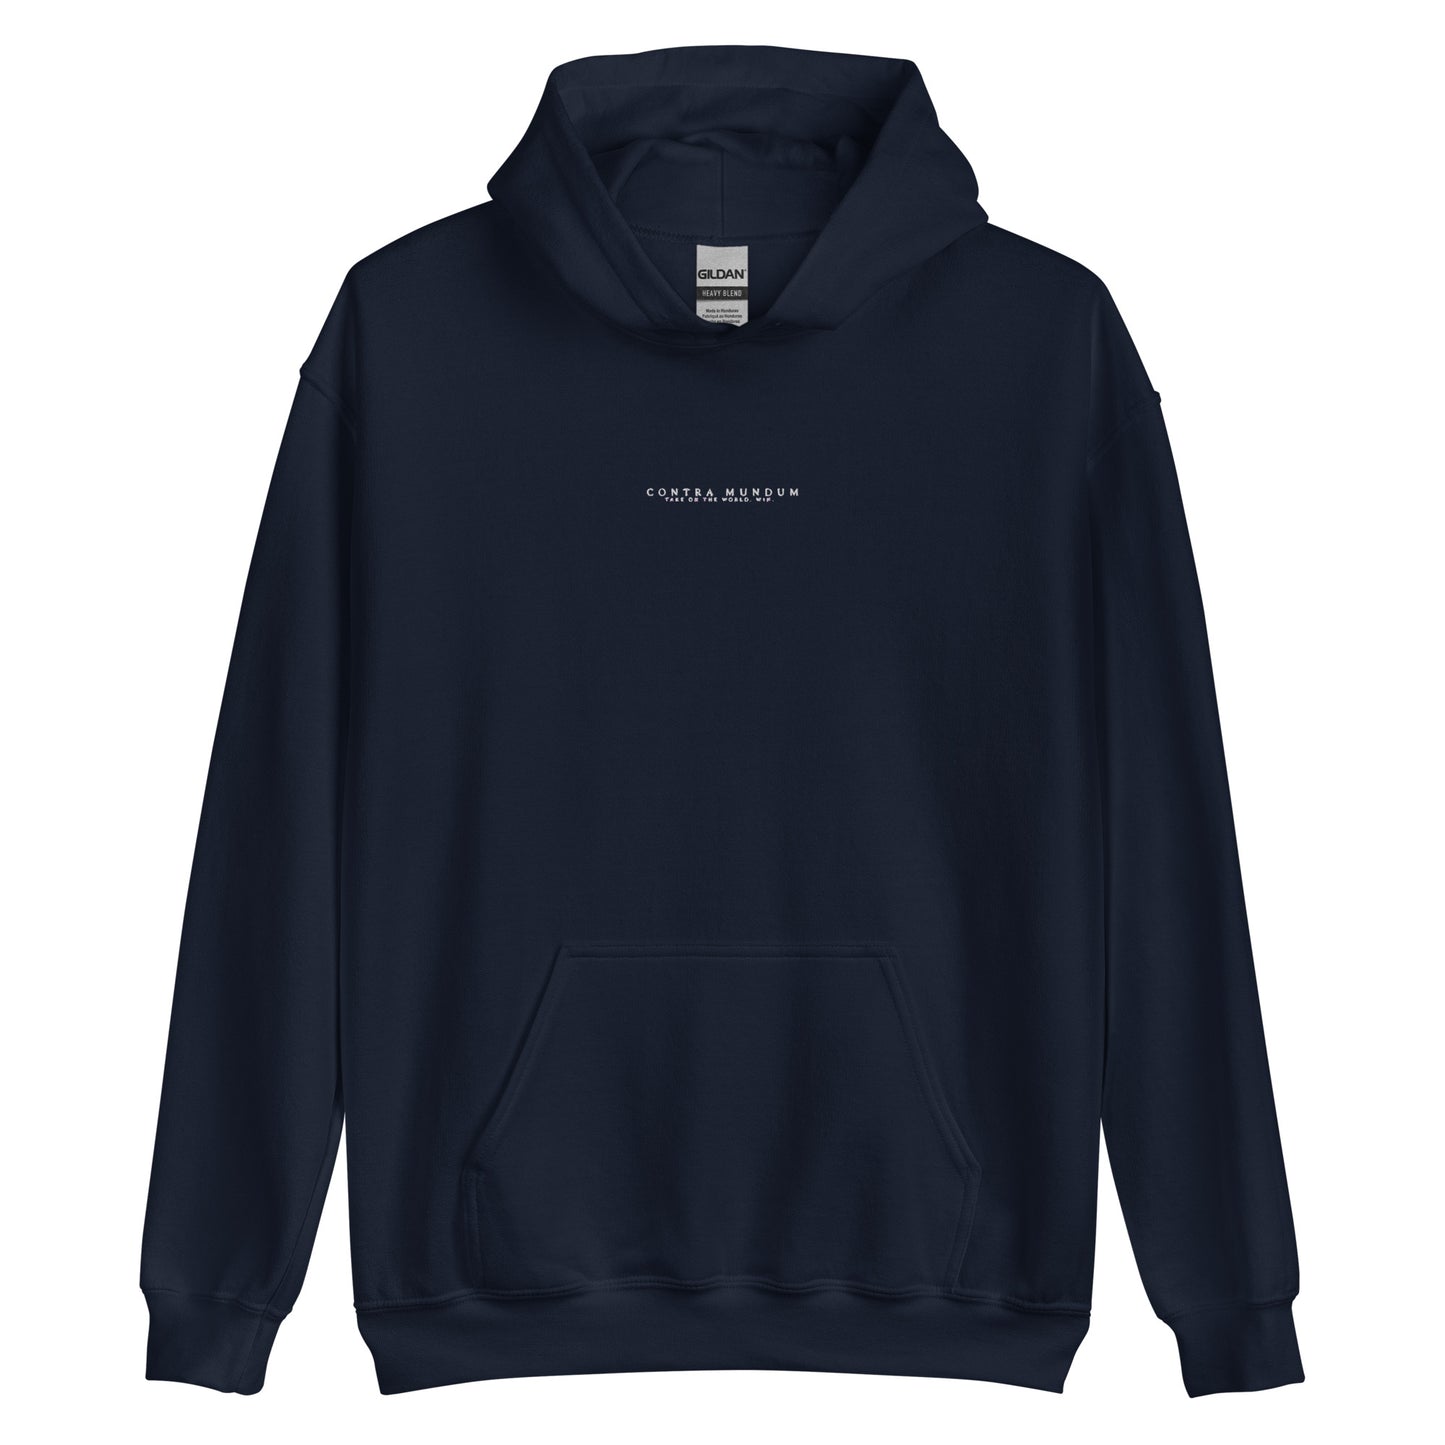 Take On The World. Win. | Men's Hoodie